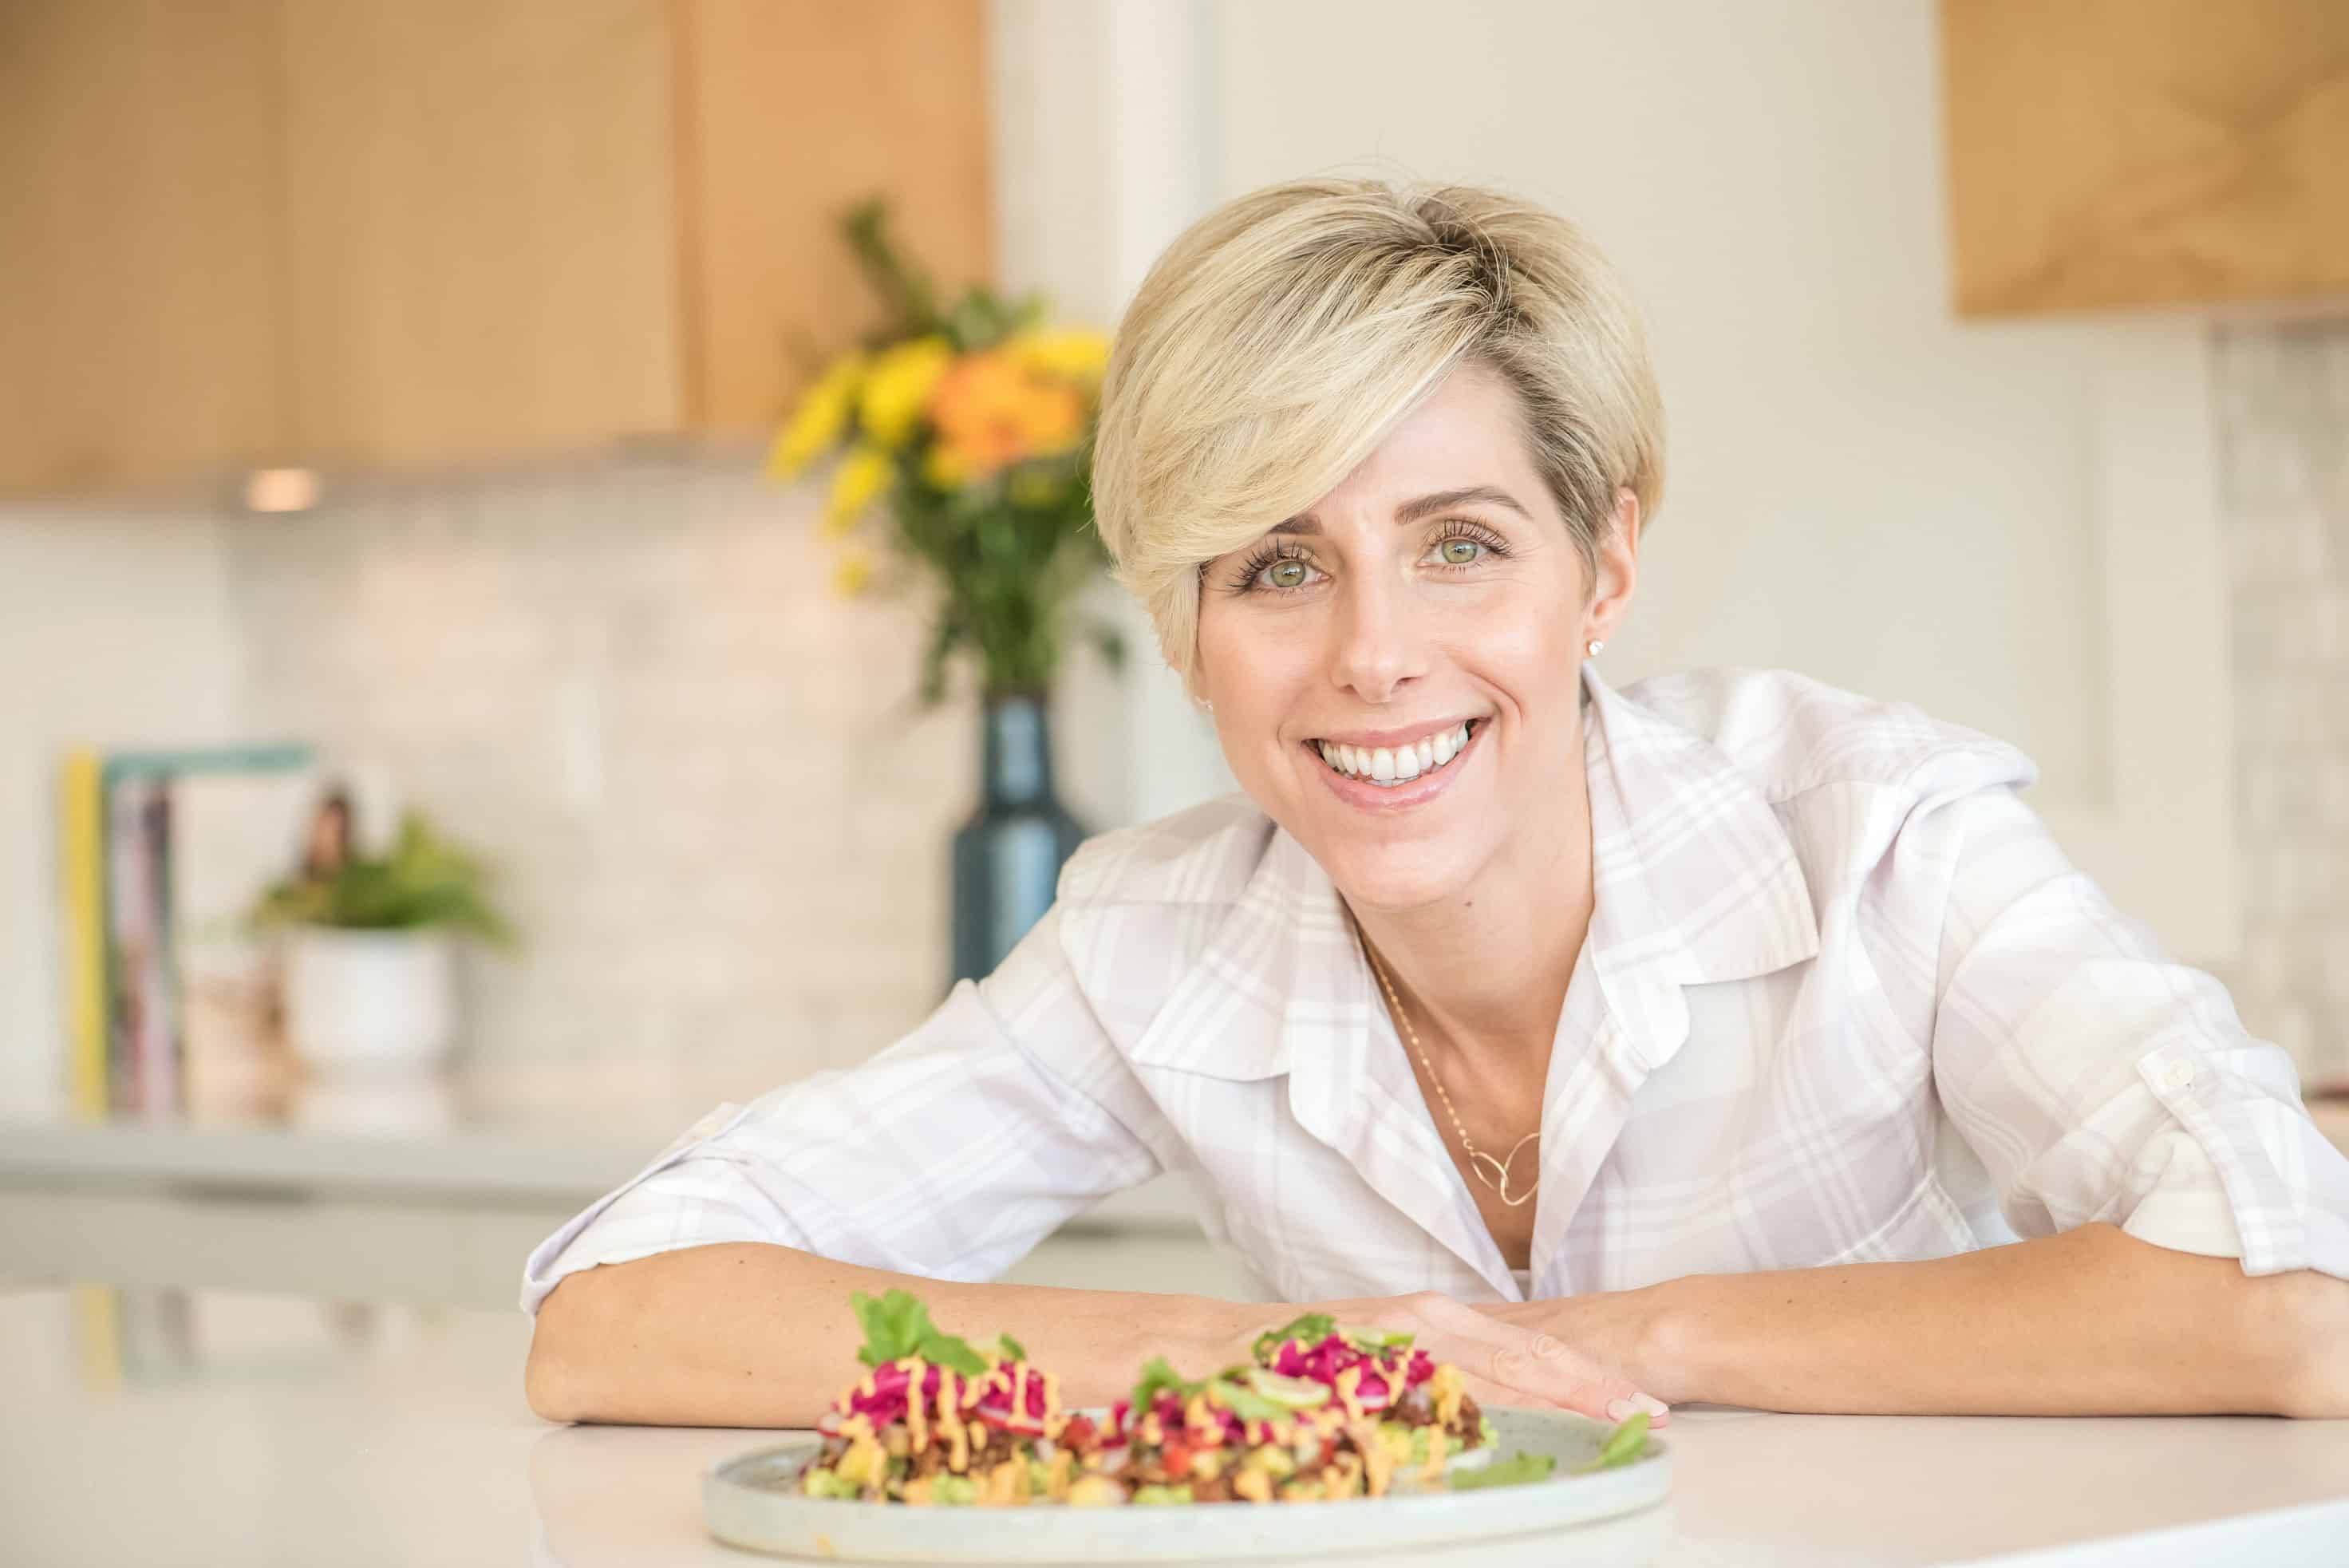 EcoLux☆Lifestyle: Pizza and Cheesecake – An Interview with Crystal Bonnet, Raw Vegan Chef